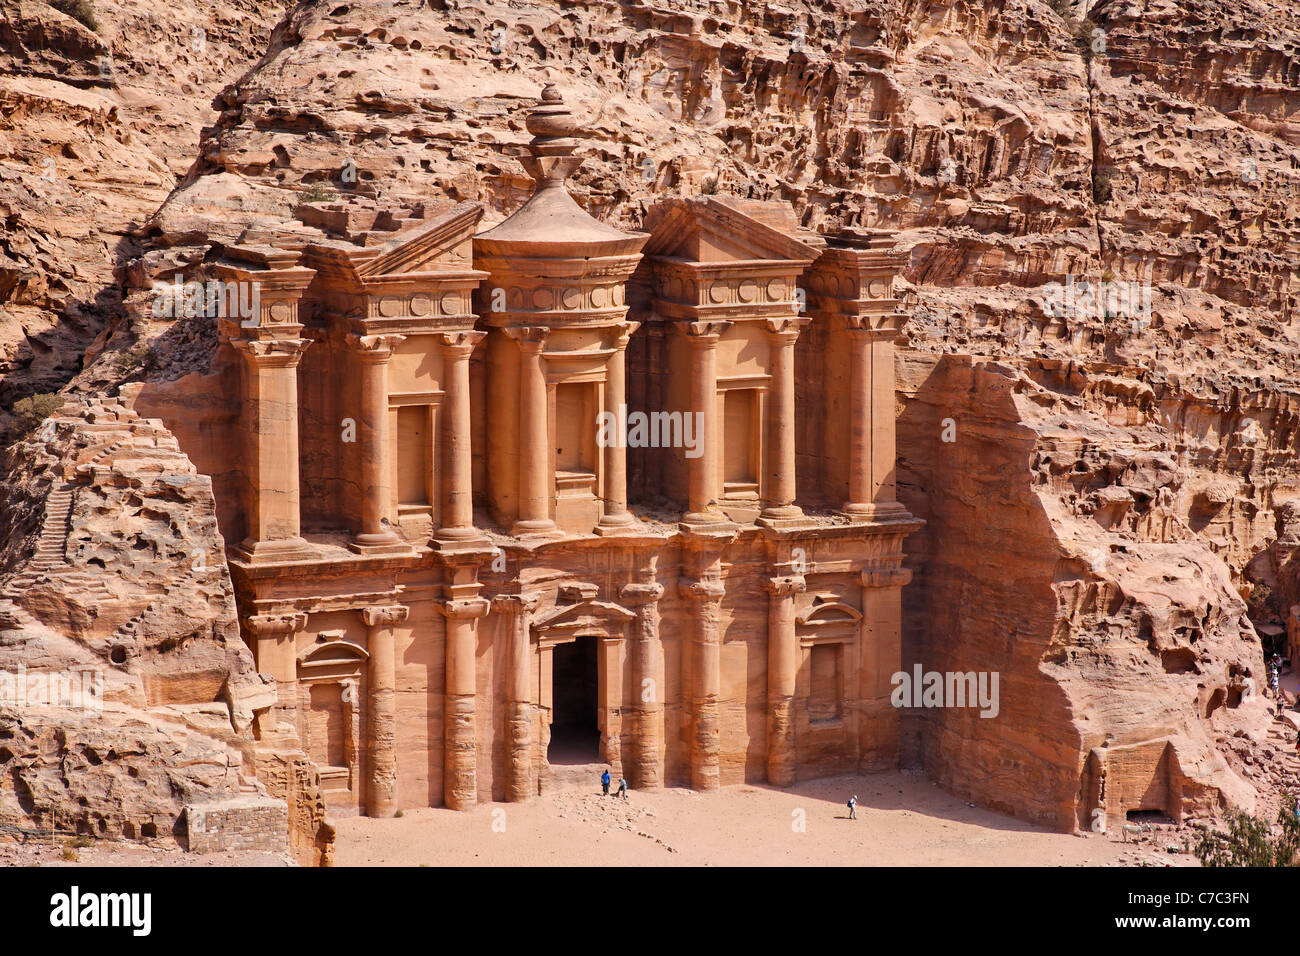 The Monastery, sculpted out of the rock, at Petra, Jordan Stock Photo